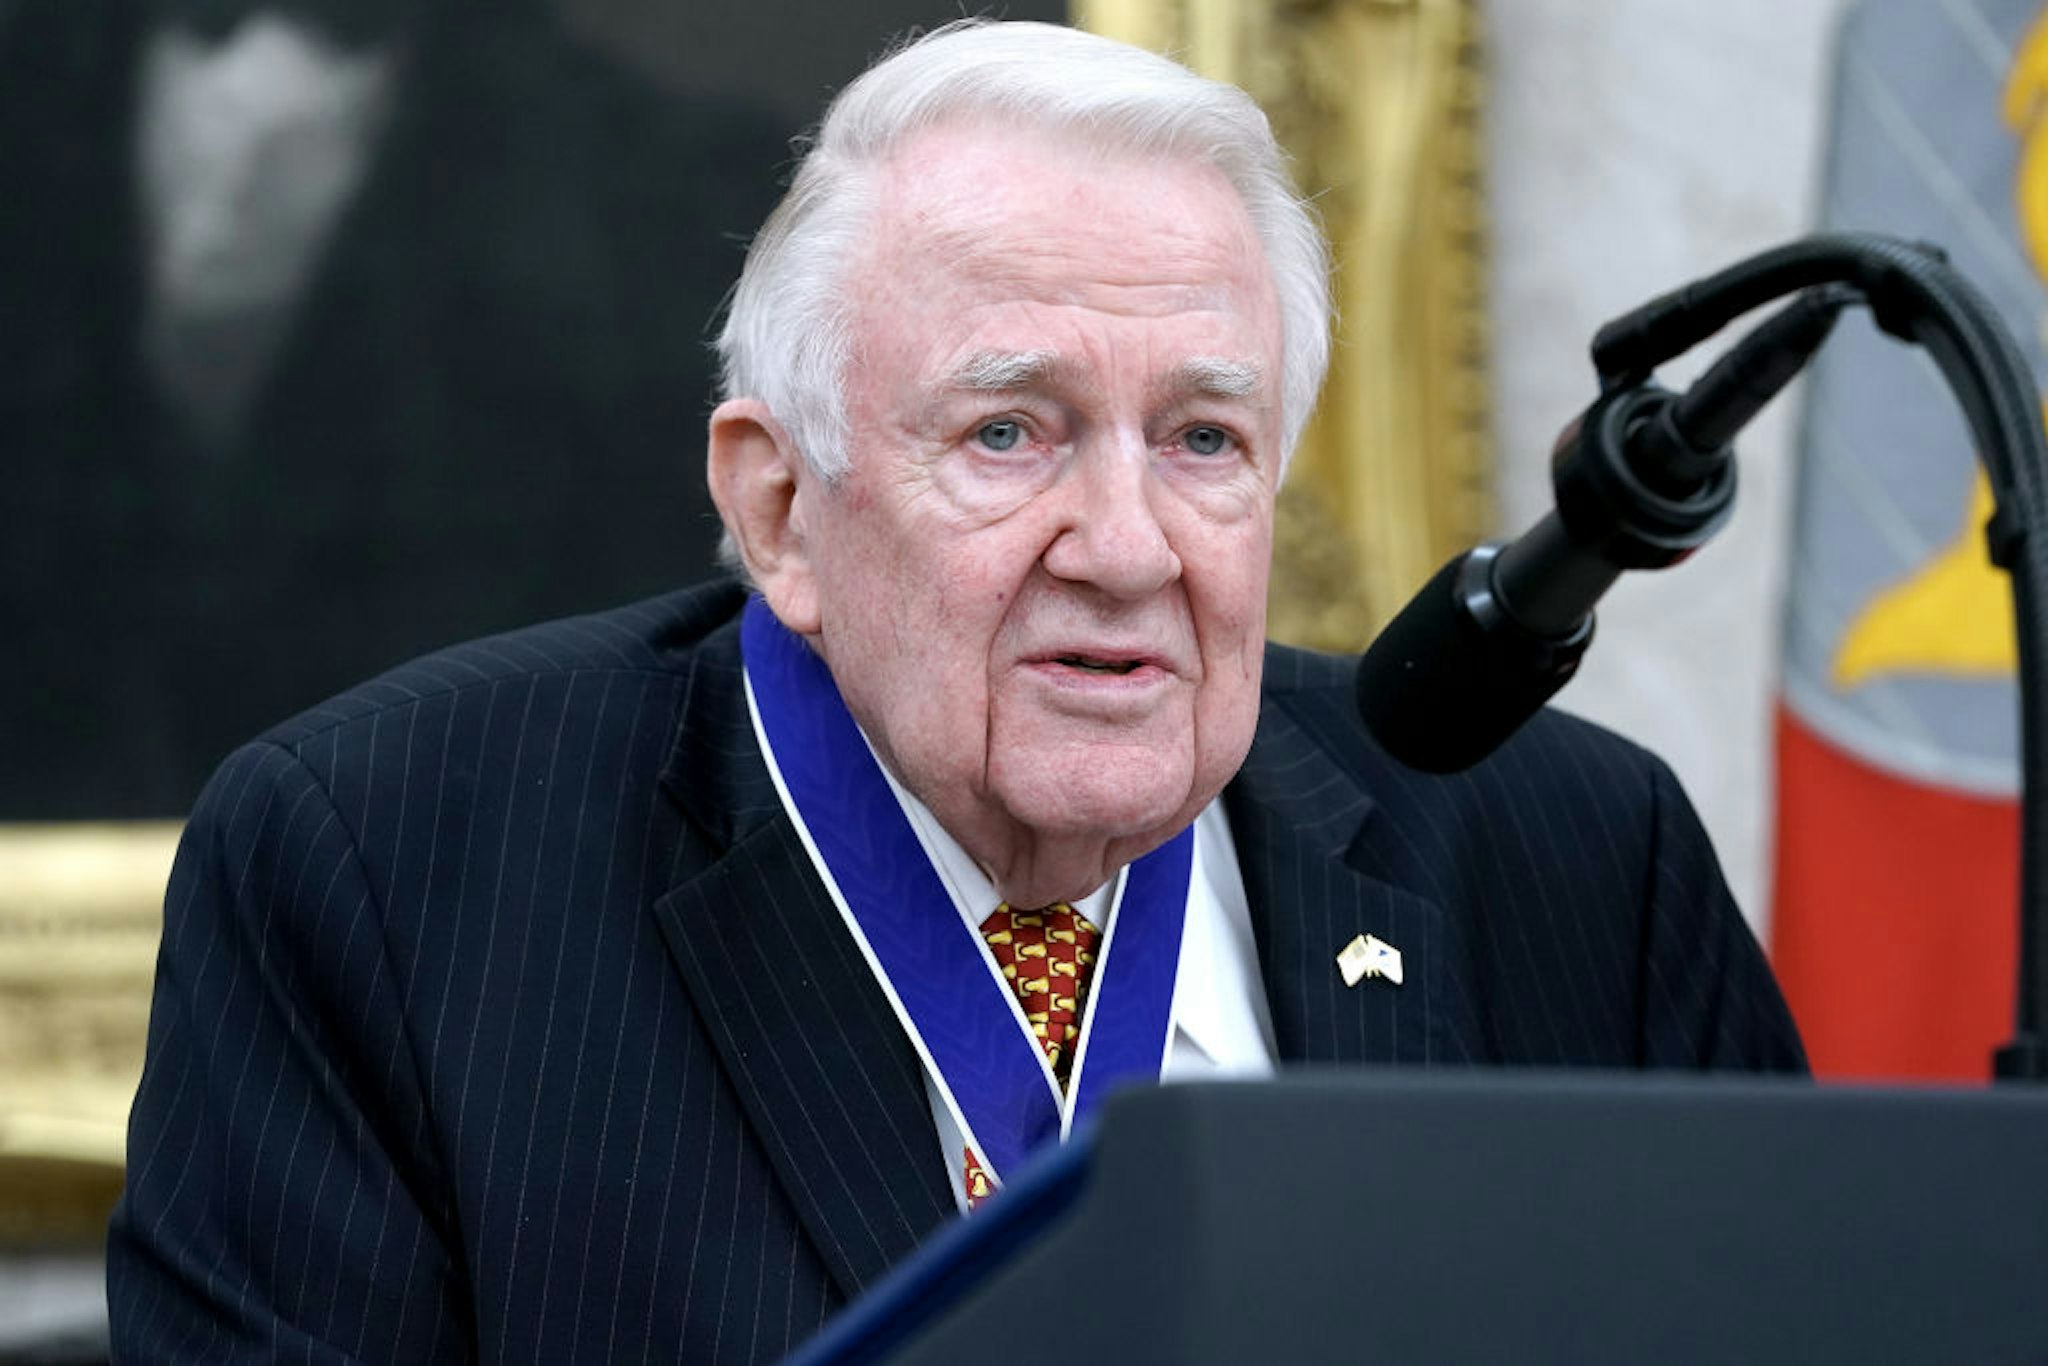 WASHINGTON, DC - OCTOBER 08: Former Attorney General Edwin Meese delivers remarks after being awarded the National Medal of Freedom by U.S. President Donald Trump during a ceremony in the Oval Office at the White House October 08, 2019 in Washington, DC. Meese was appointed attorney general by President Ronald Reagan and served from 1985 to 1988.